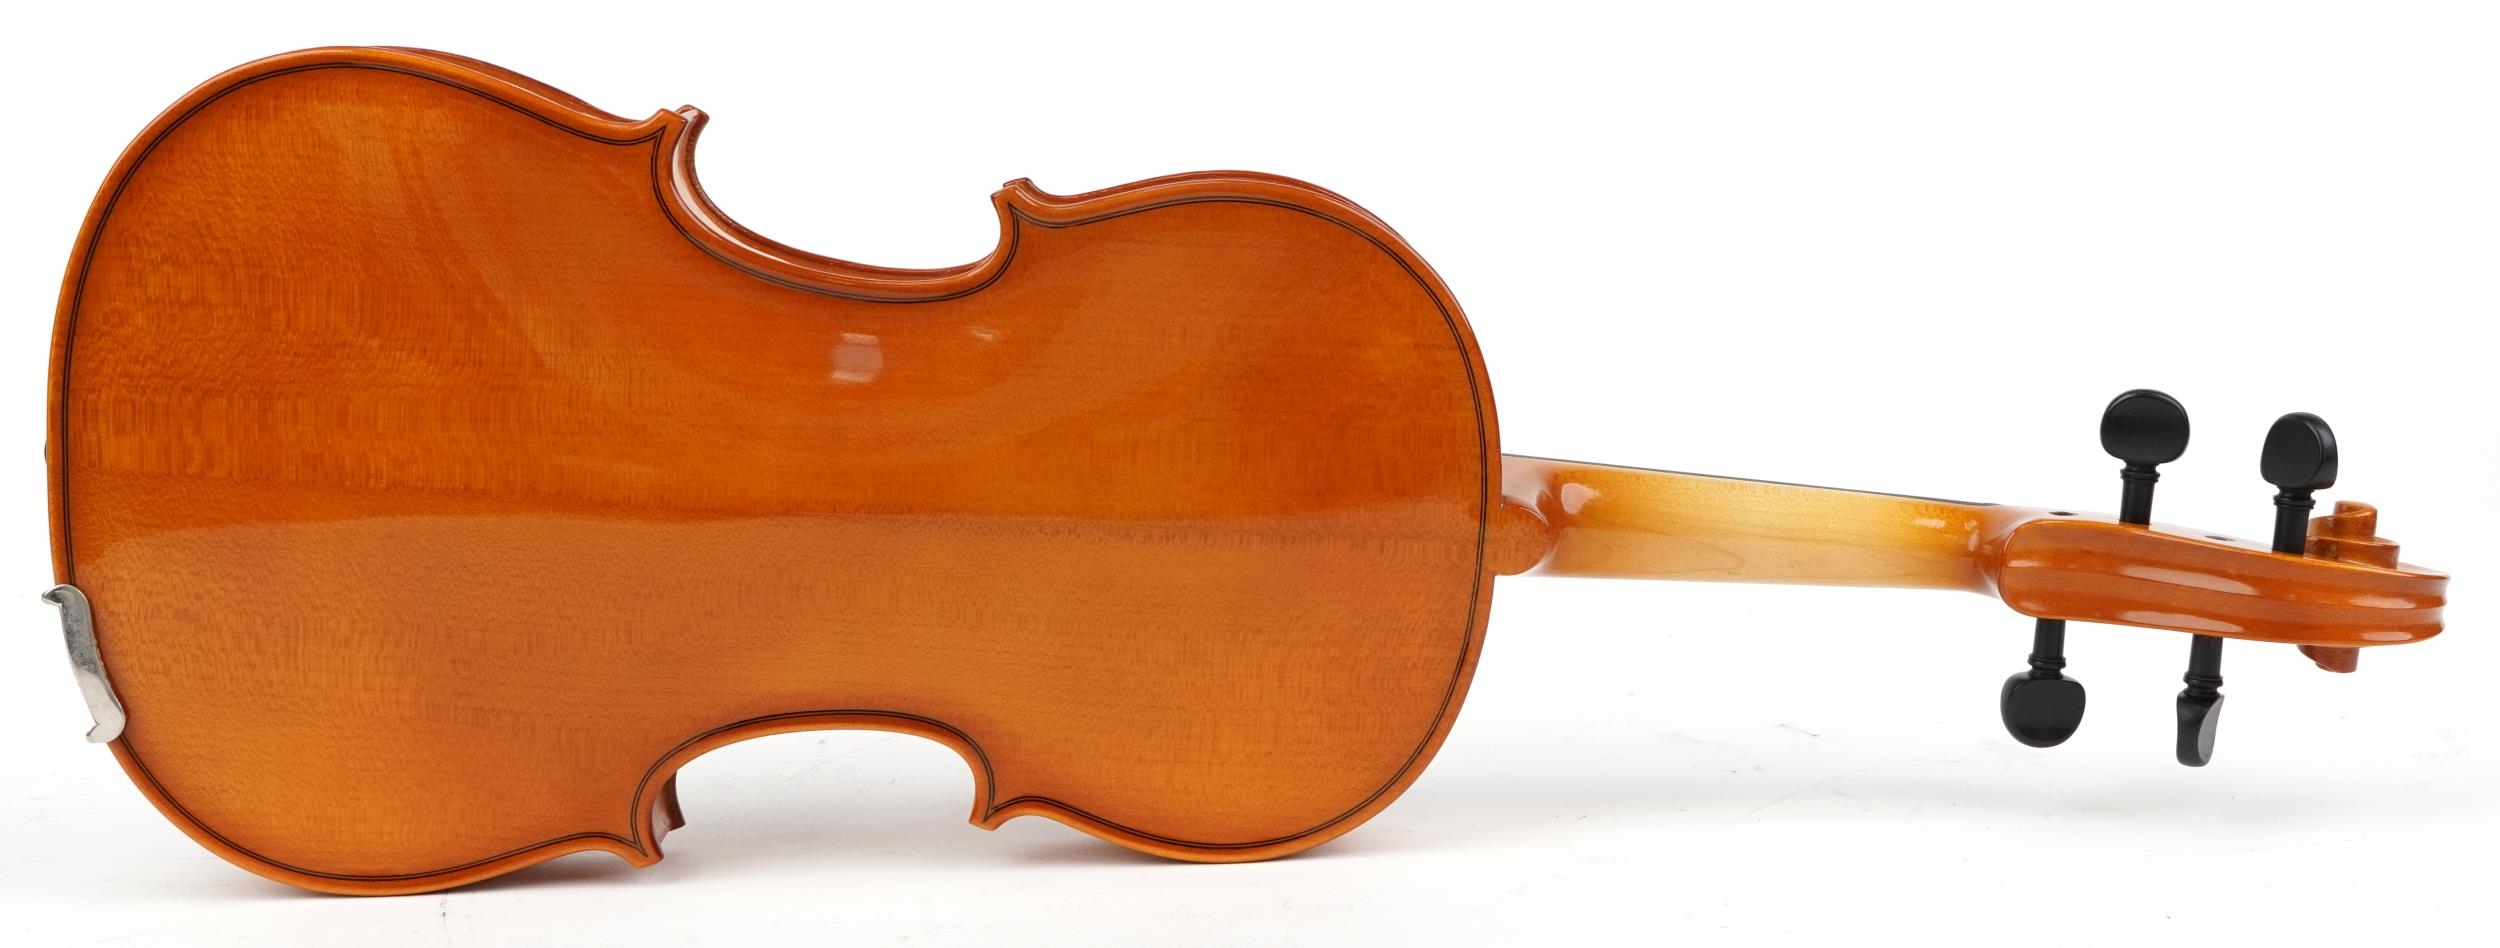 Andreas Zeller for Stentor, violin with fitted case, paper label to the interior, the back 15.5 - Image 6 of 12